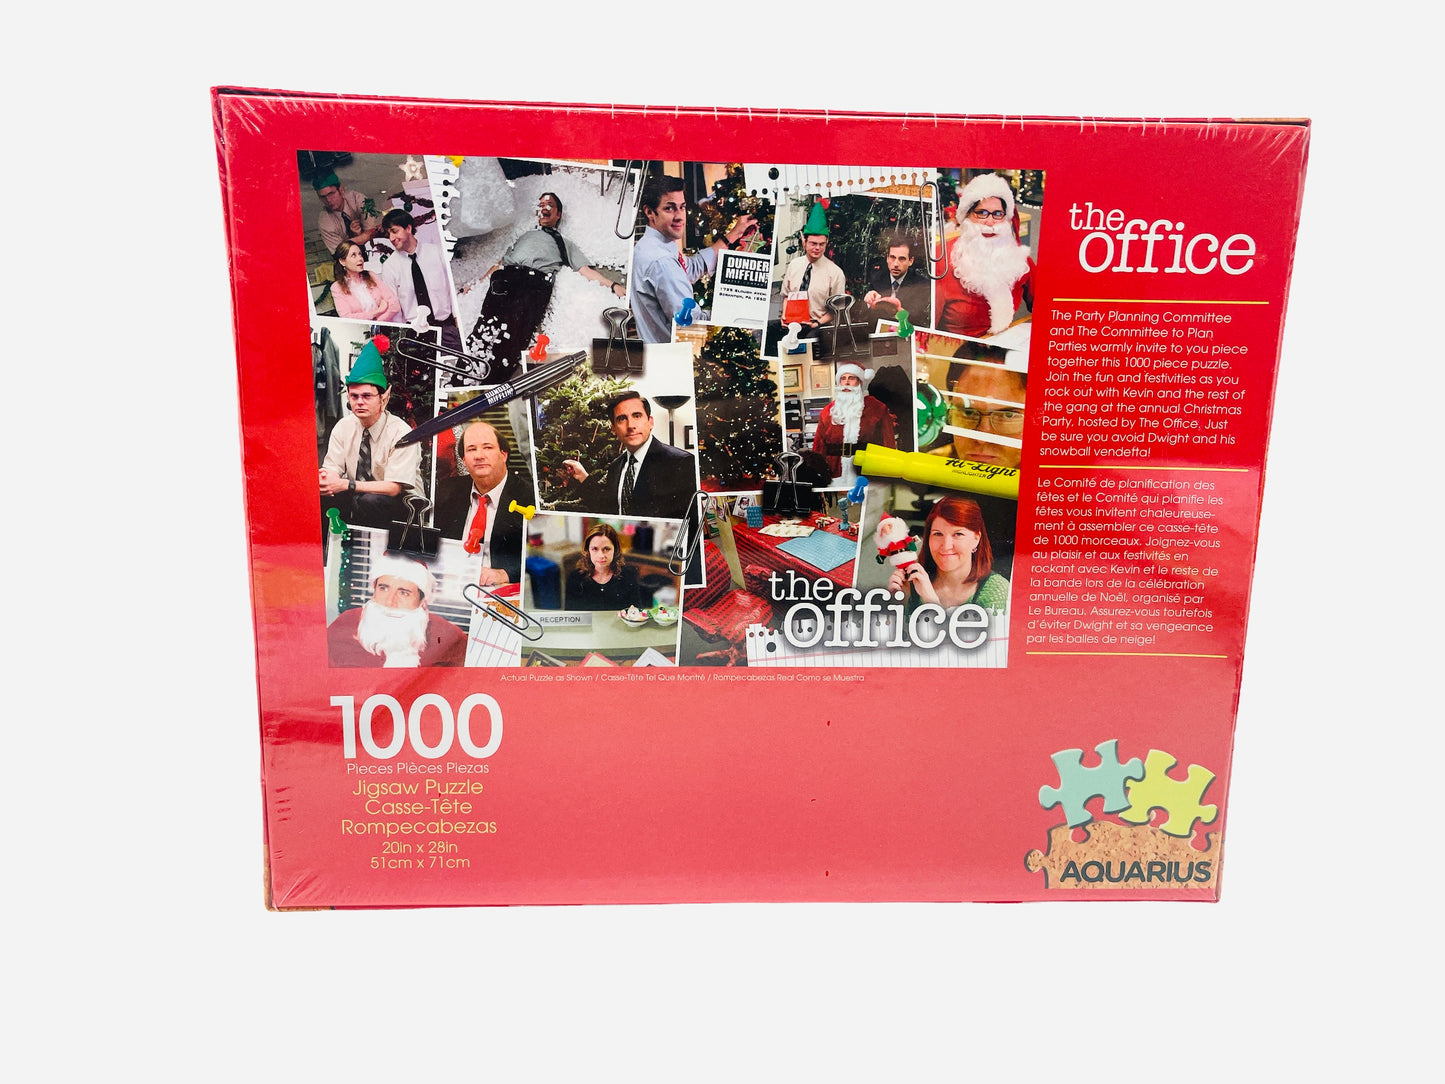 The Office Christmas 1,000 Piece Jigsaw Puzzle